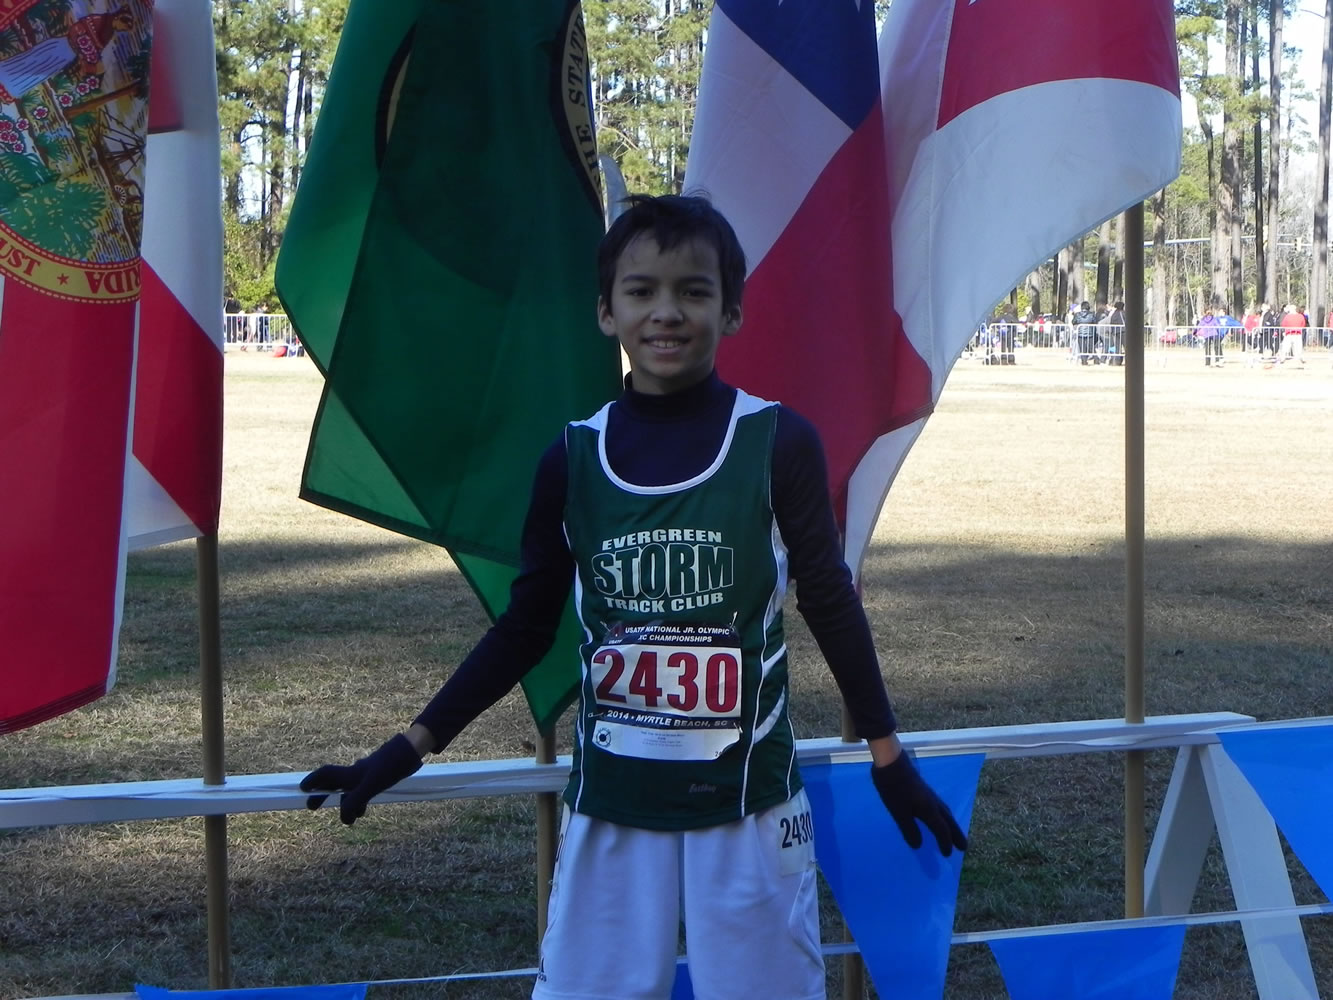 Tyler Dinh placed fifth in the boys 9-10 age group at the USA Track and Field Junior Olympics National Cross Country Championship on Saturday, Dec.